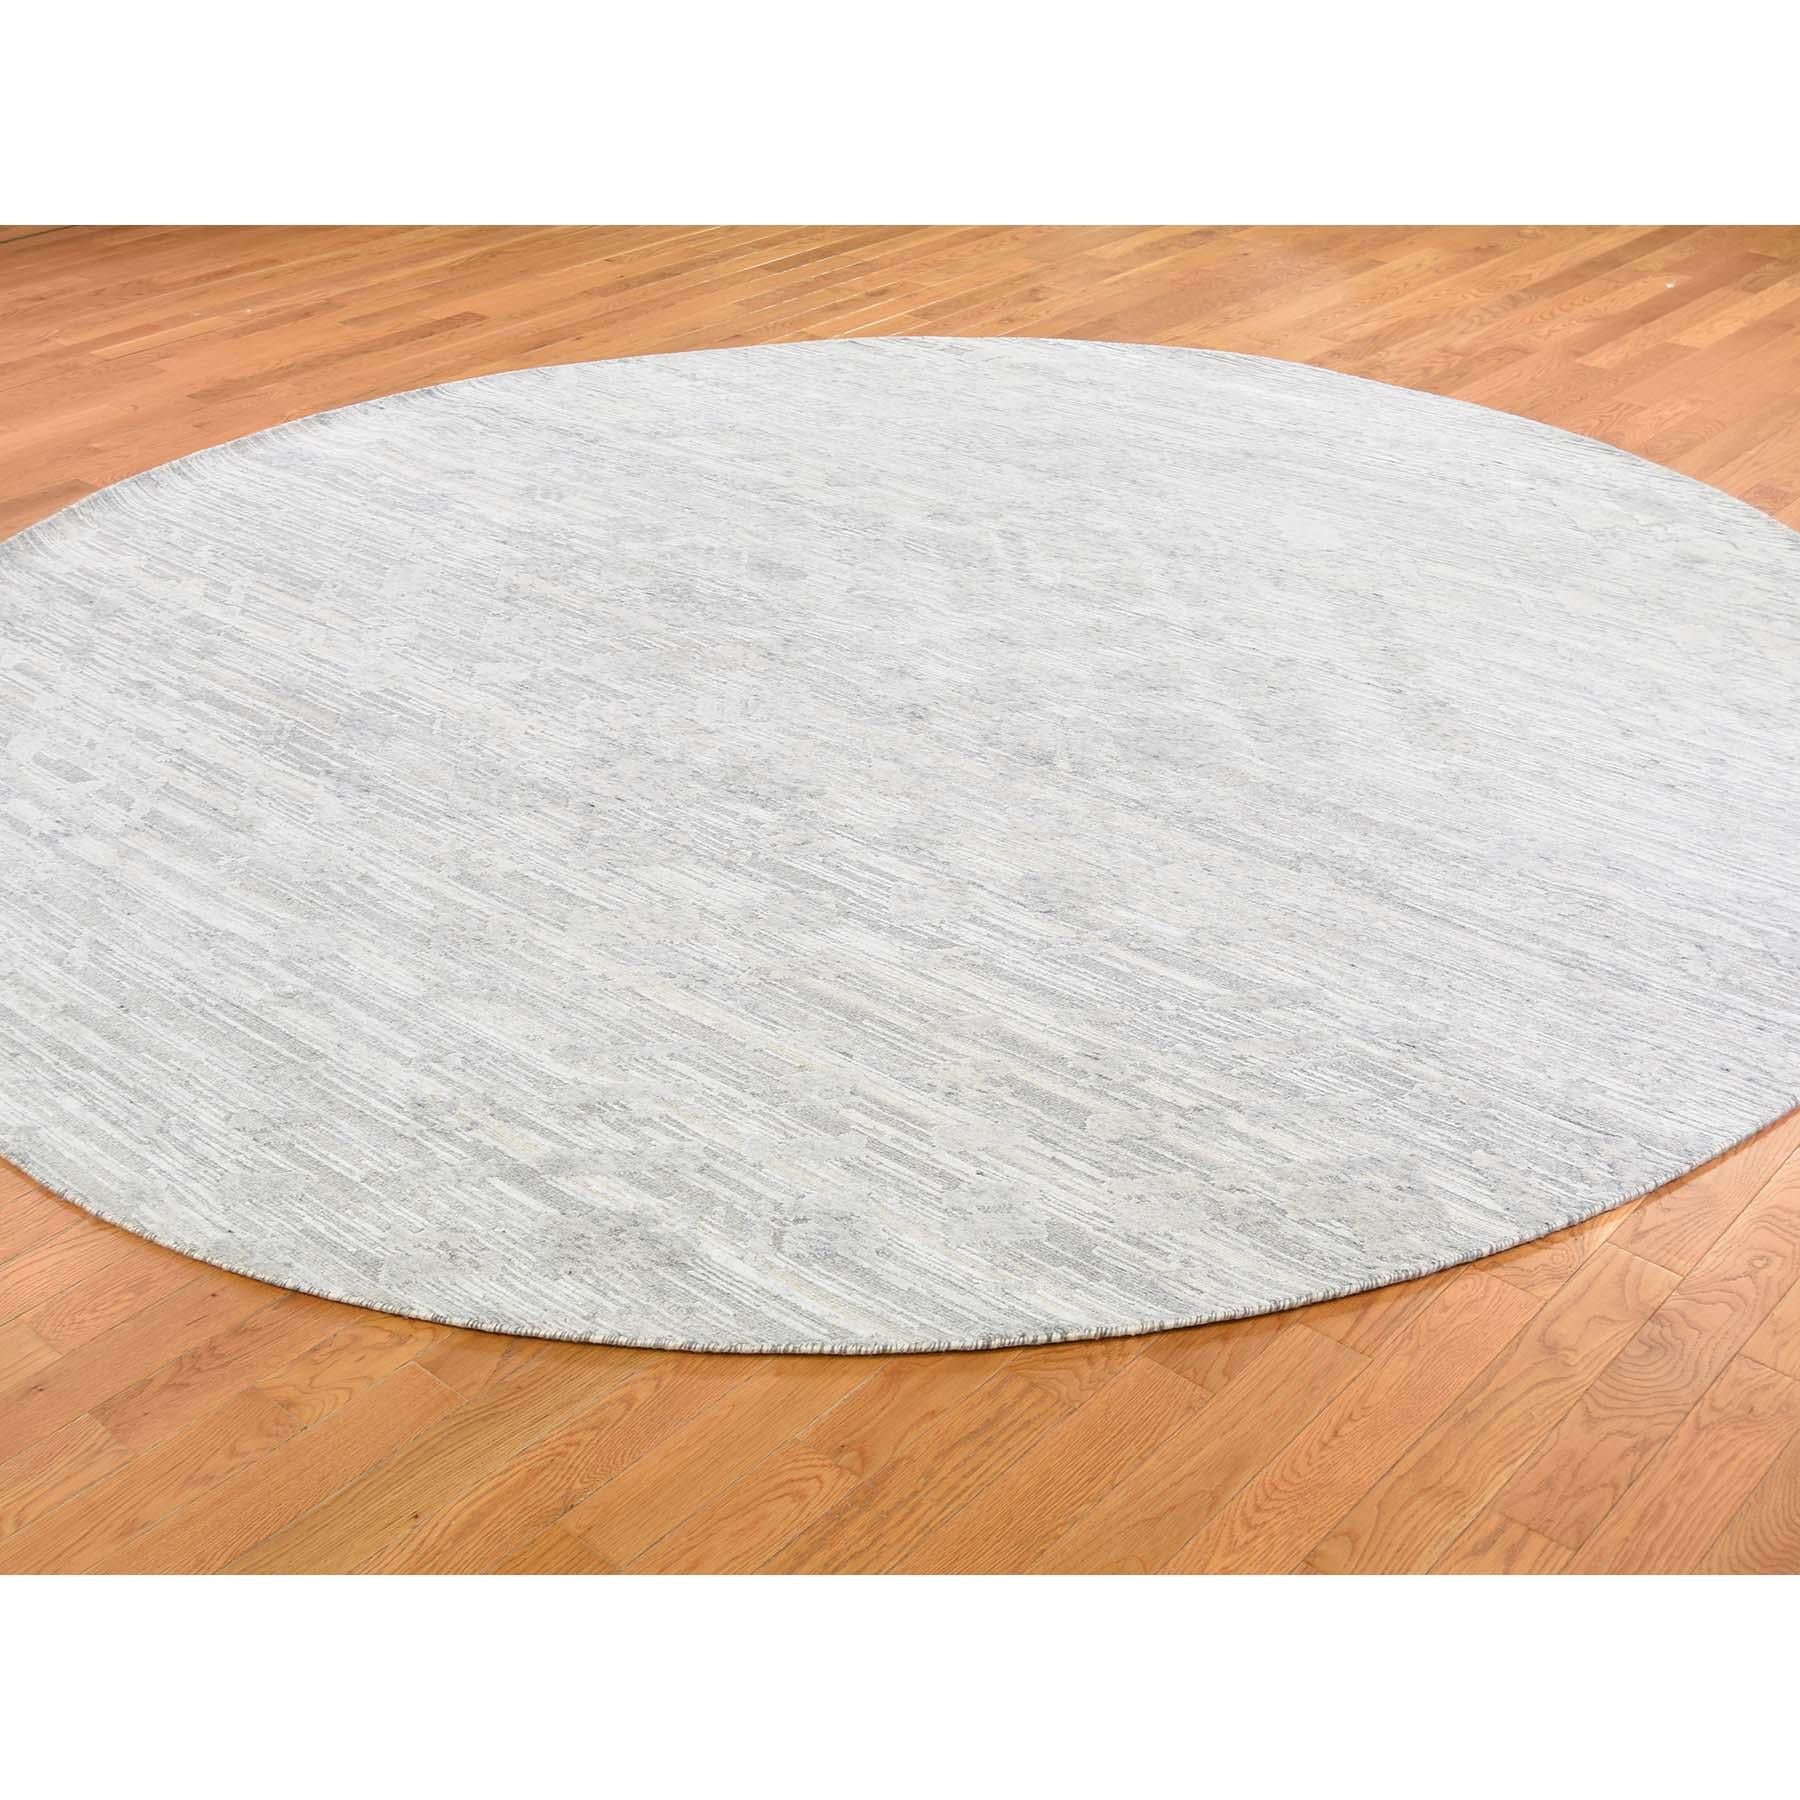 Afghan Round Hand Spun Undyed Natural Wool Modern Hand Knotted Oriental Rug